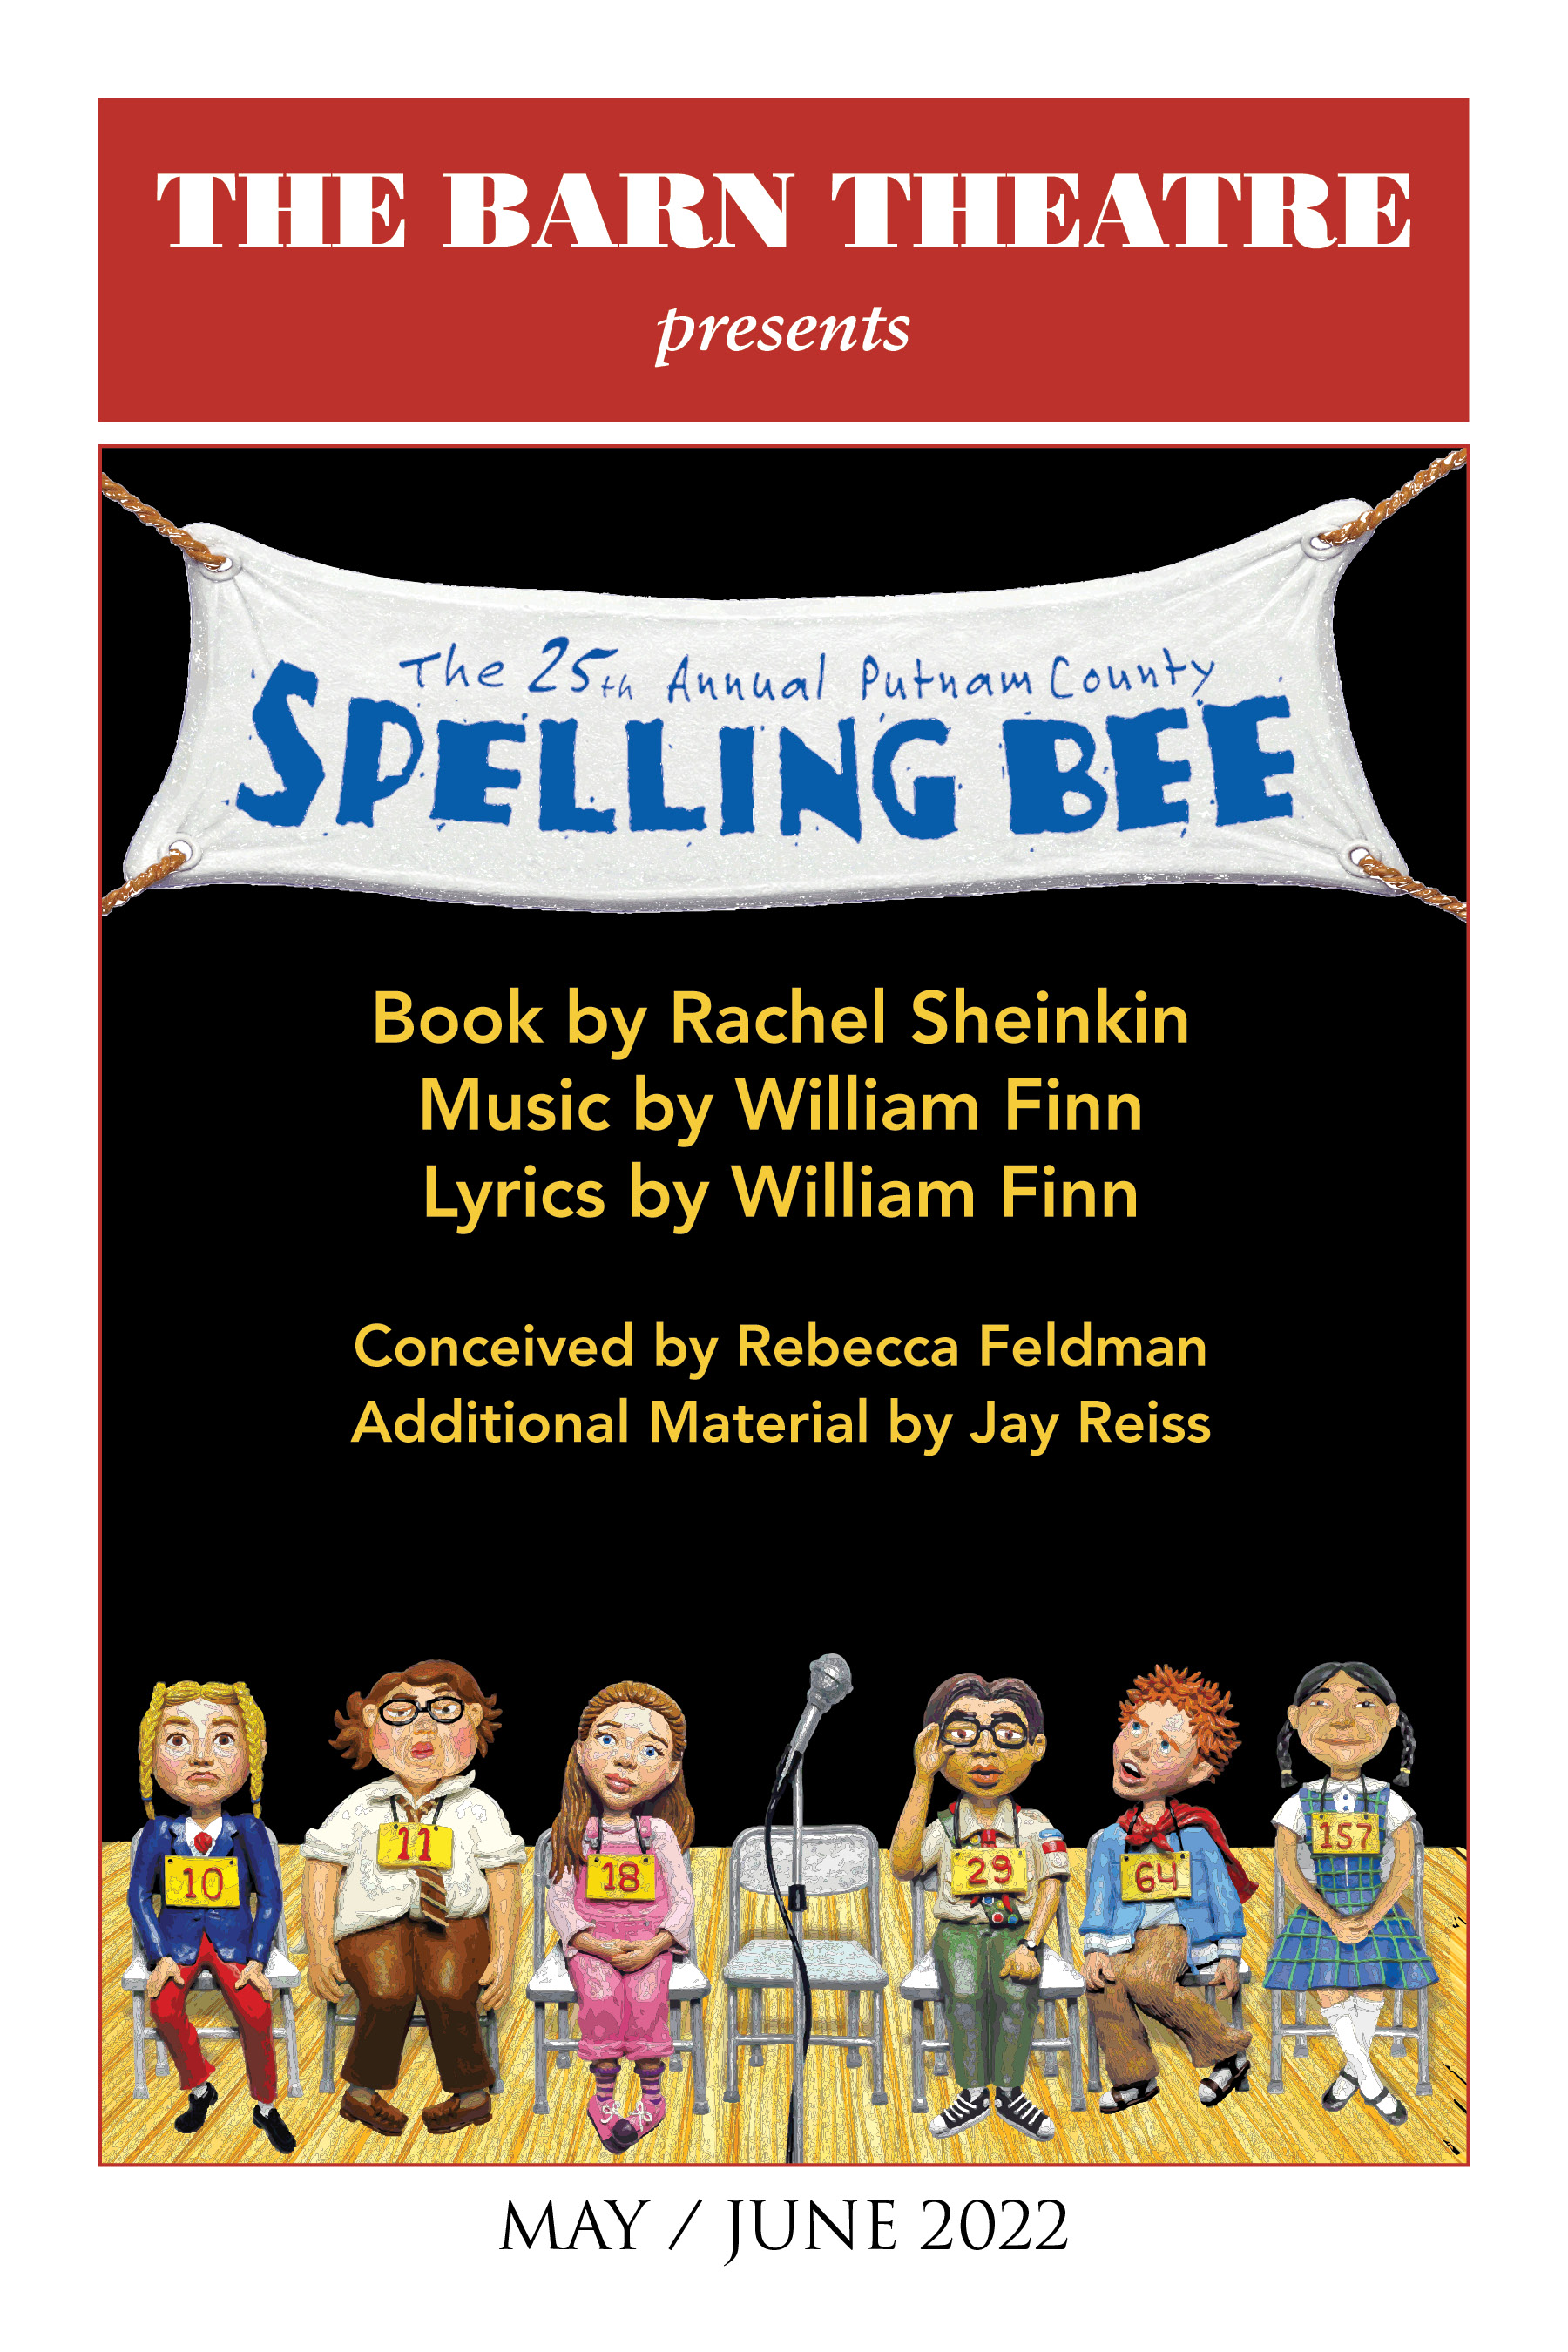 Program Cover for The 25th Annual Putnam County Spelling Bee